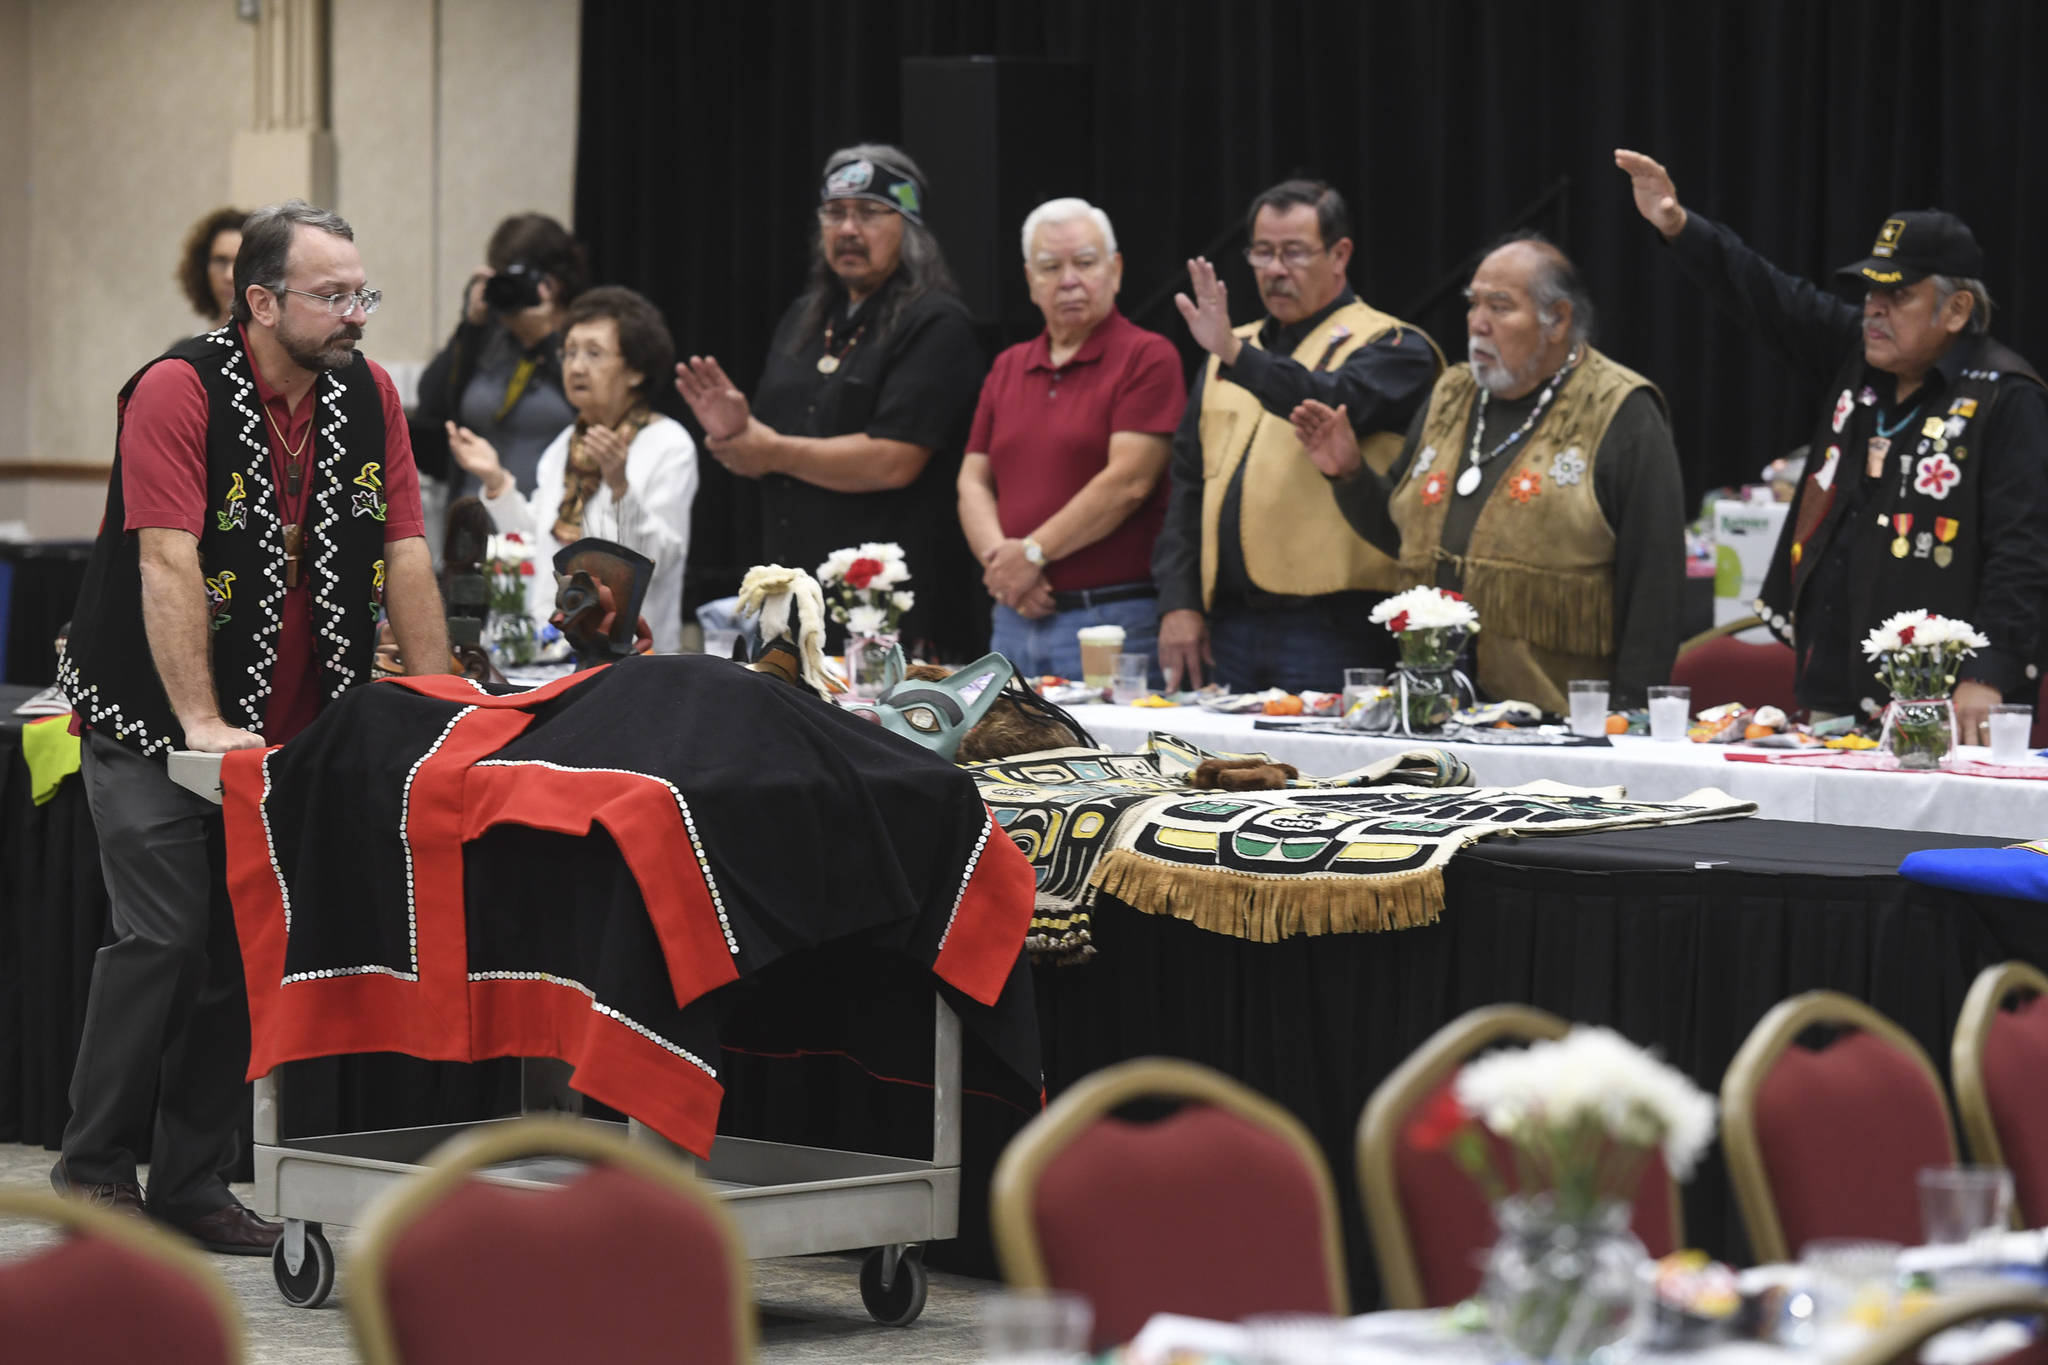 Eric Hollinger, Tribal Liaison for the Repatriation Office of the Smithsonian’s National Museum of Natural History, left, pushes in a cart holding the original sculpin clan hat for a welcoming ceremony at Elizabeth Peratrovich Hall on Wednesday, Sept. 25, 2019. The hat was collected from the Kiks.ádi Clan in Sitka in 1884. The Smithsonian Institution used a 3D digitization process to document the hat and constructed a replica hat using traditional materials. (Michael Penn | Juneau Empire)